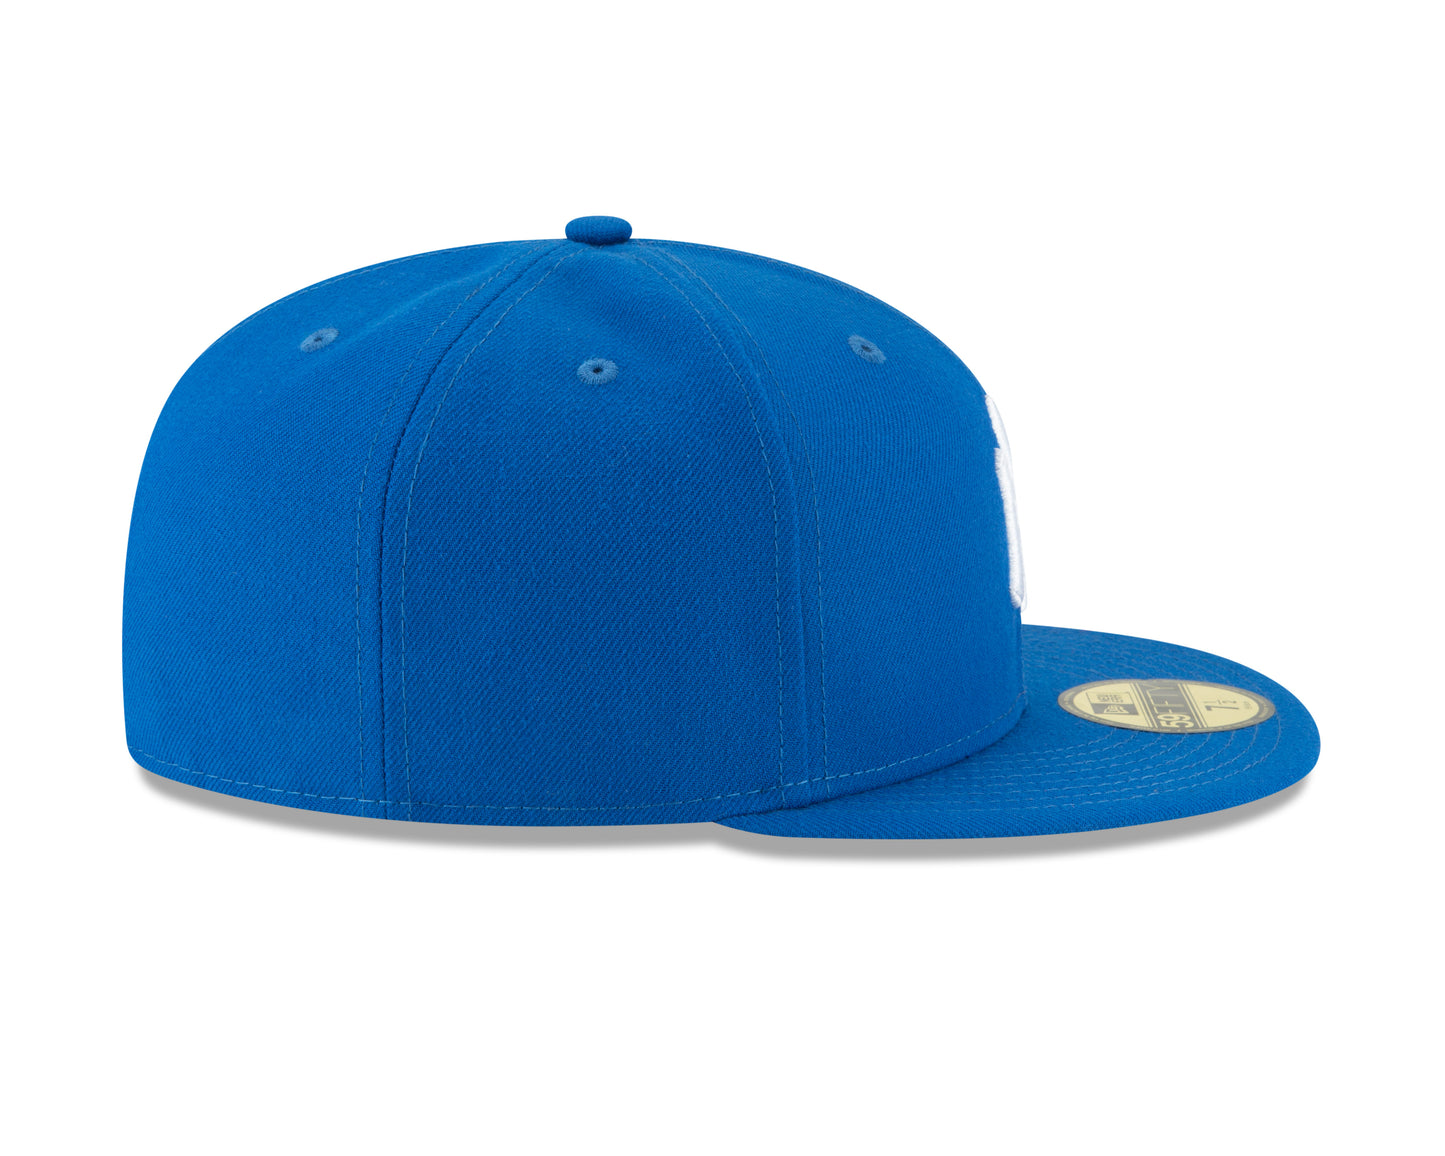 New York Yankees New Era Fashion Color Basic 59FIFTY Fitted Hat - Light Blue